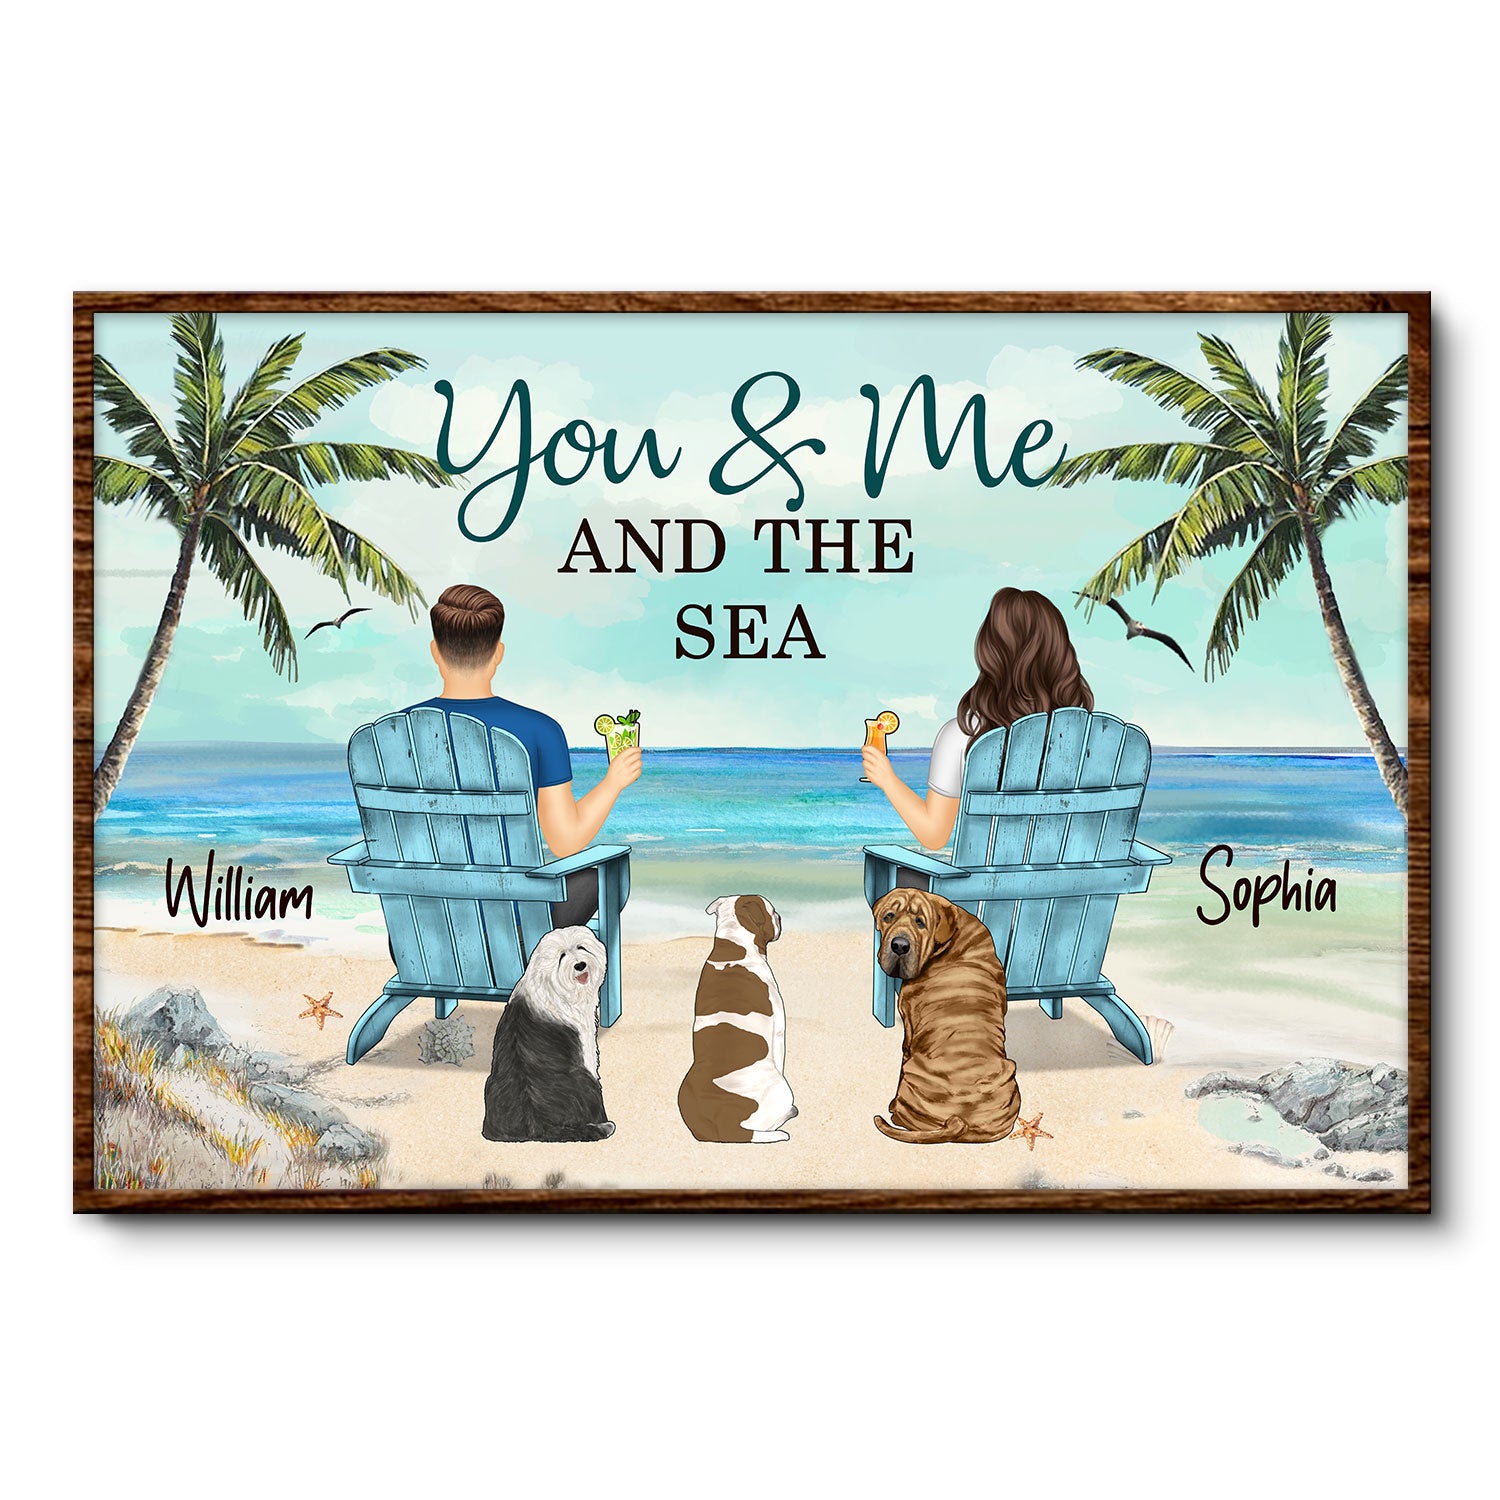 You & Me And The Sea And Dogs Back View Couple Sitting Beach Landscape - Birthday, Anniversary Gift For Husband, Wife, Parents, Dog Lovers - Personalized Poster